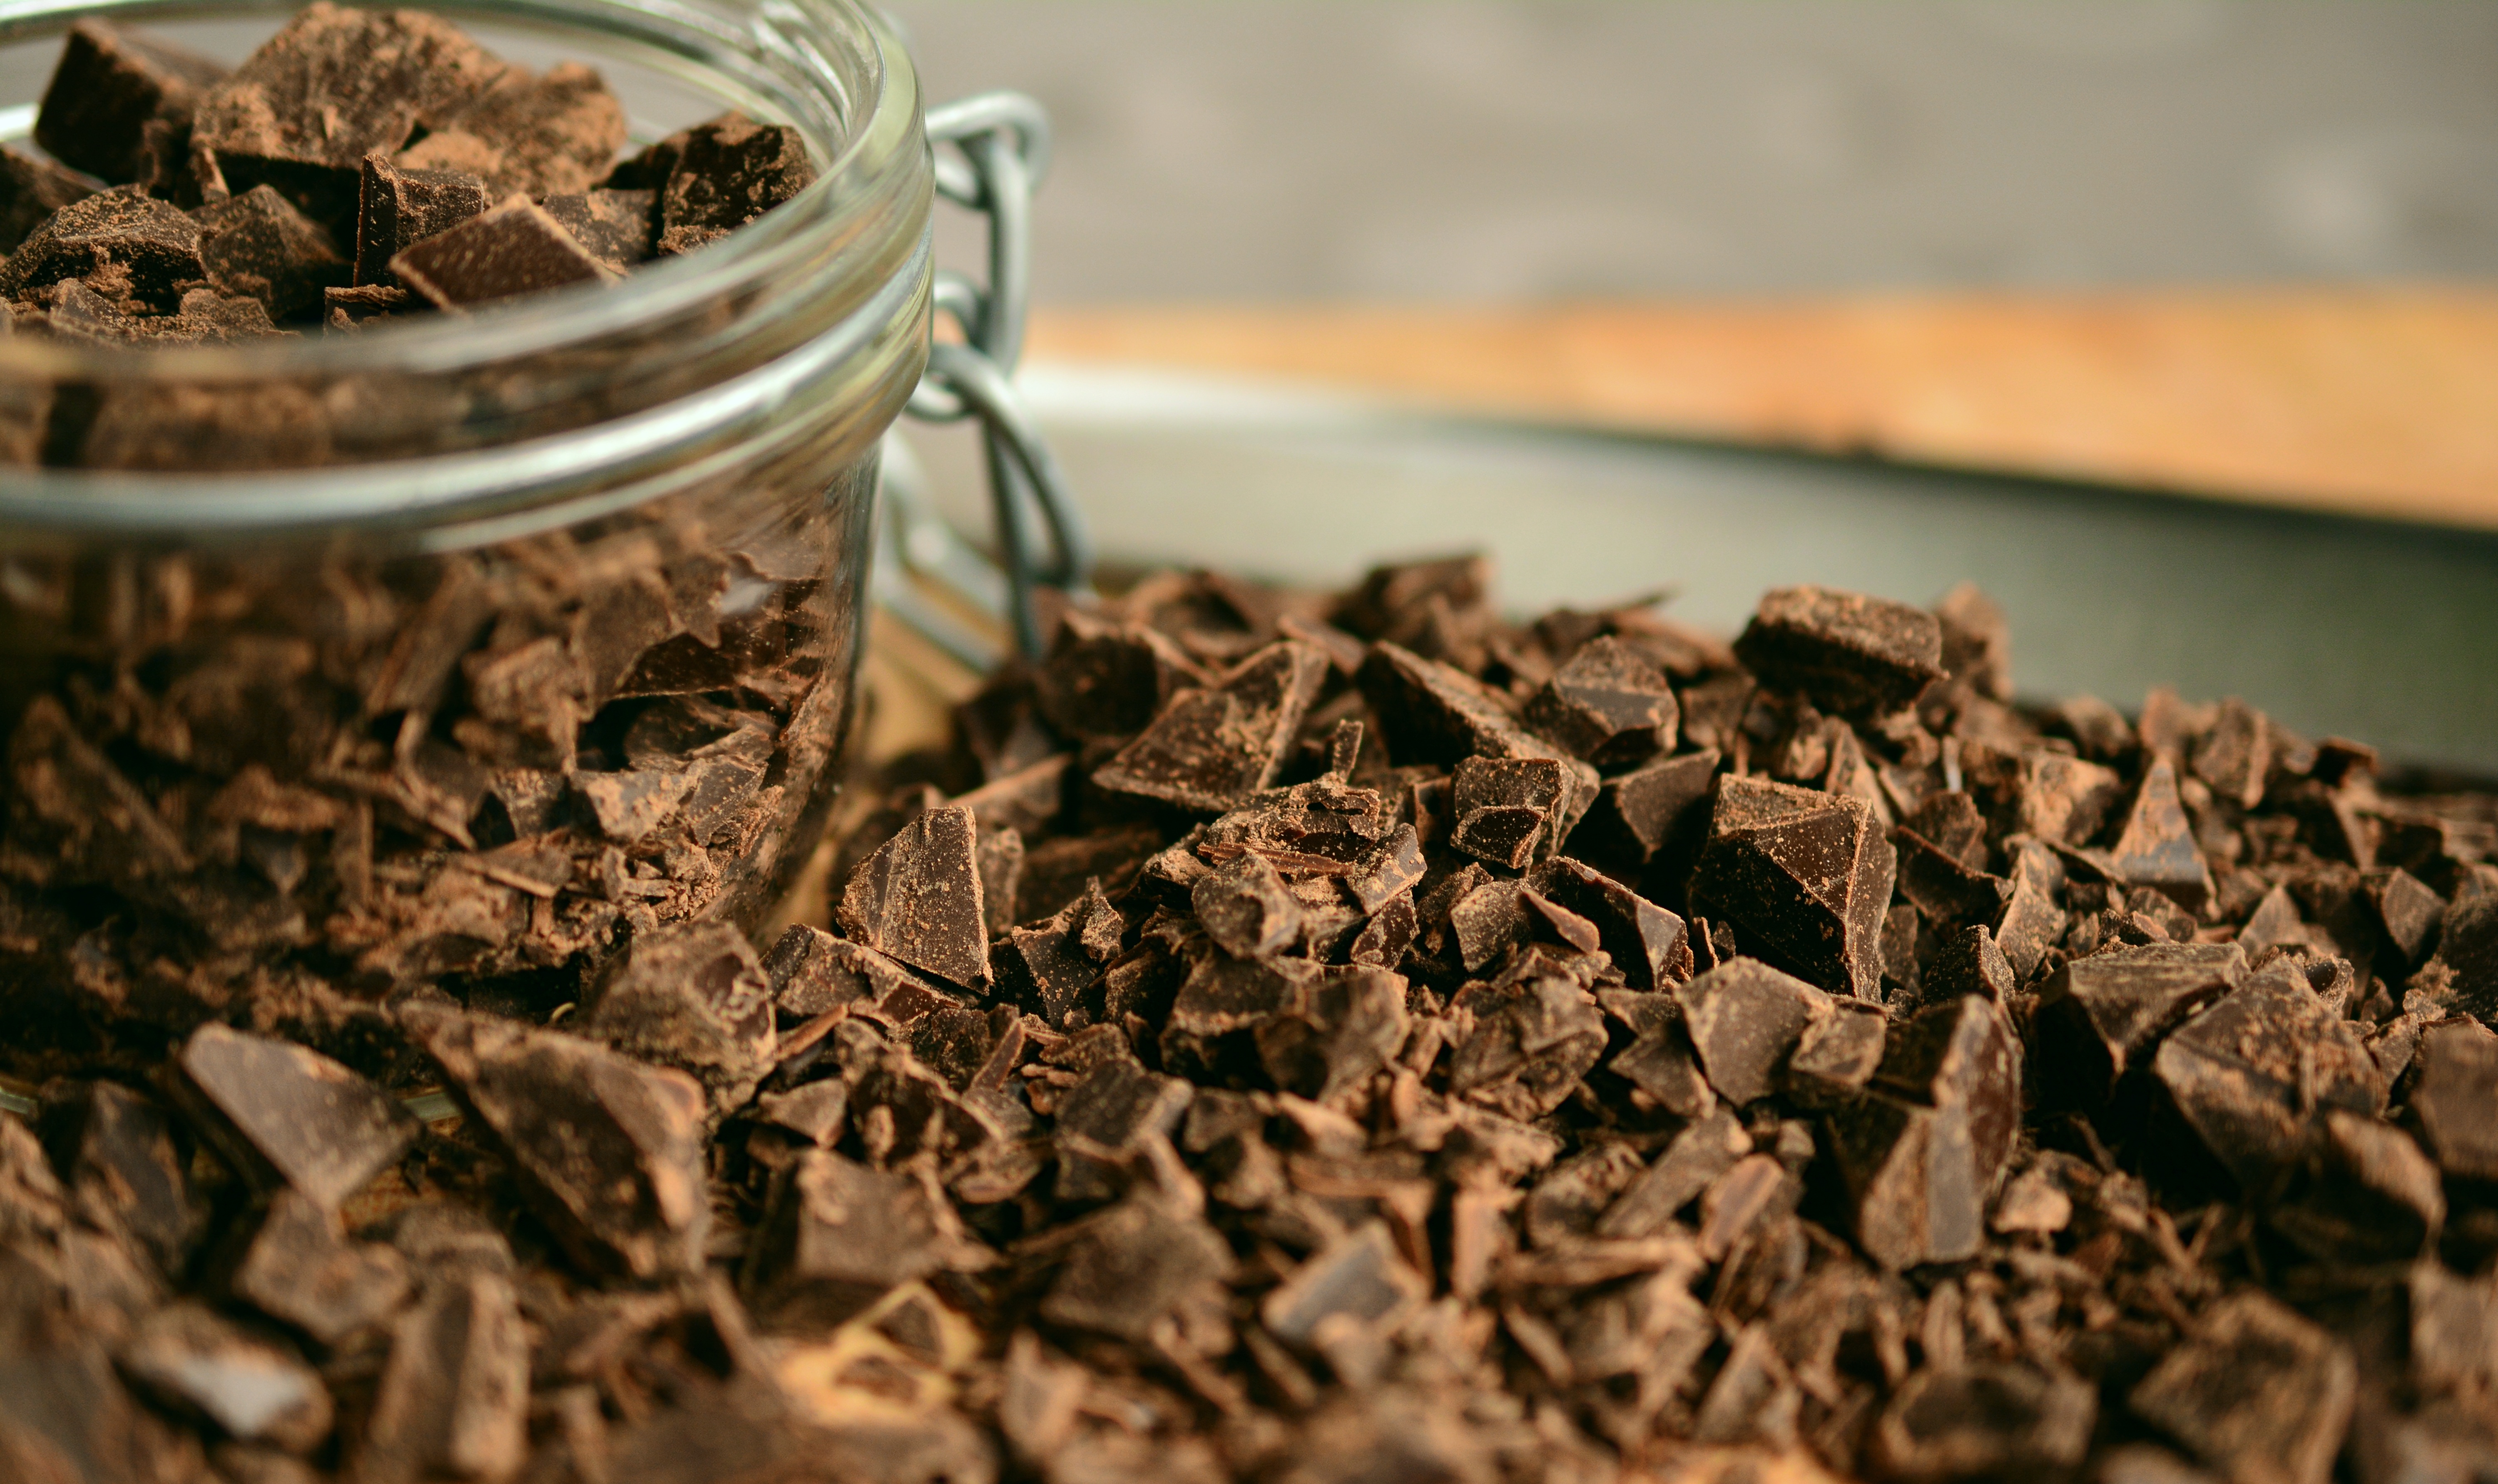 A mason jar filled, and surrounded, with chopped chocolate.